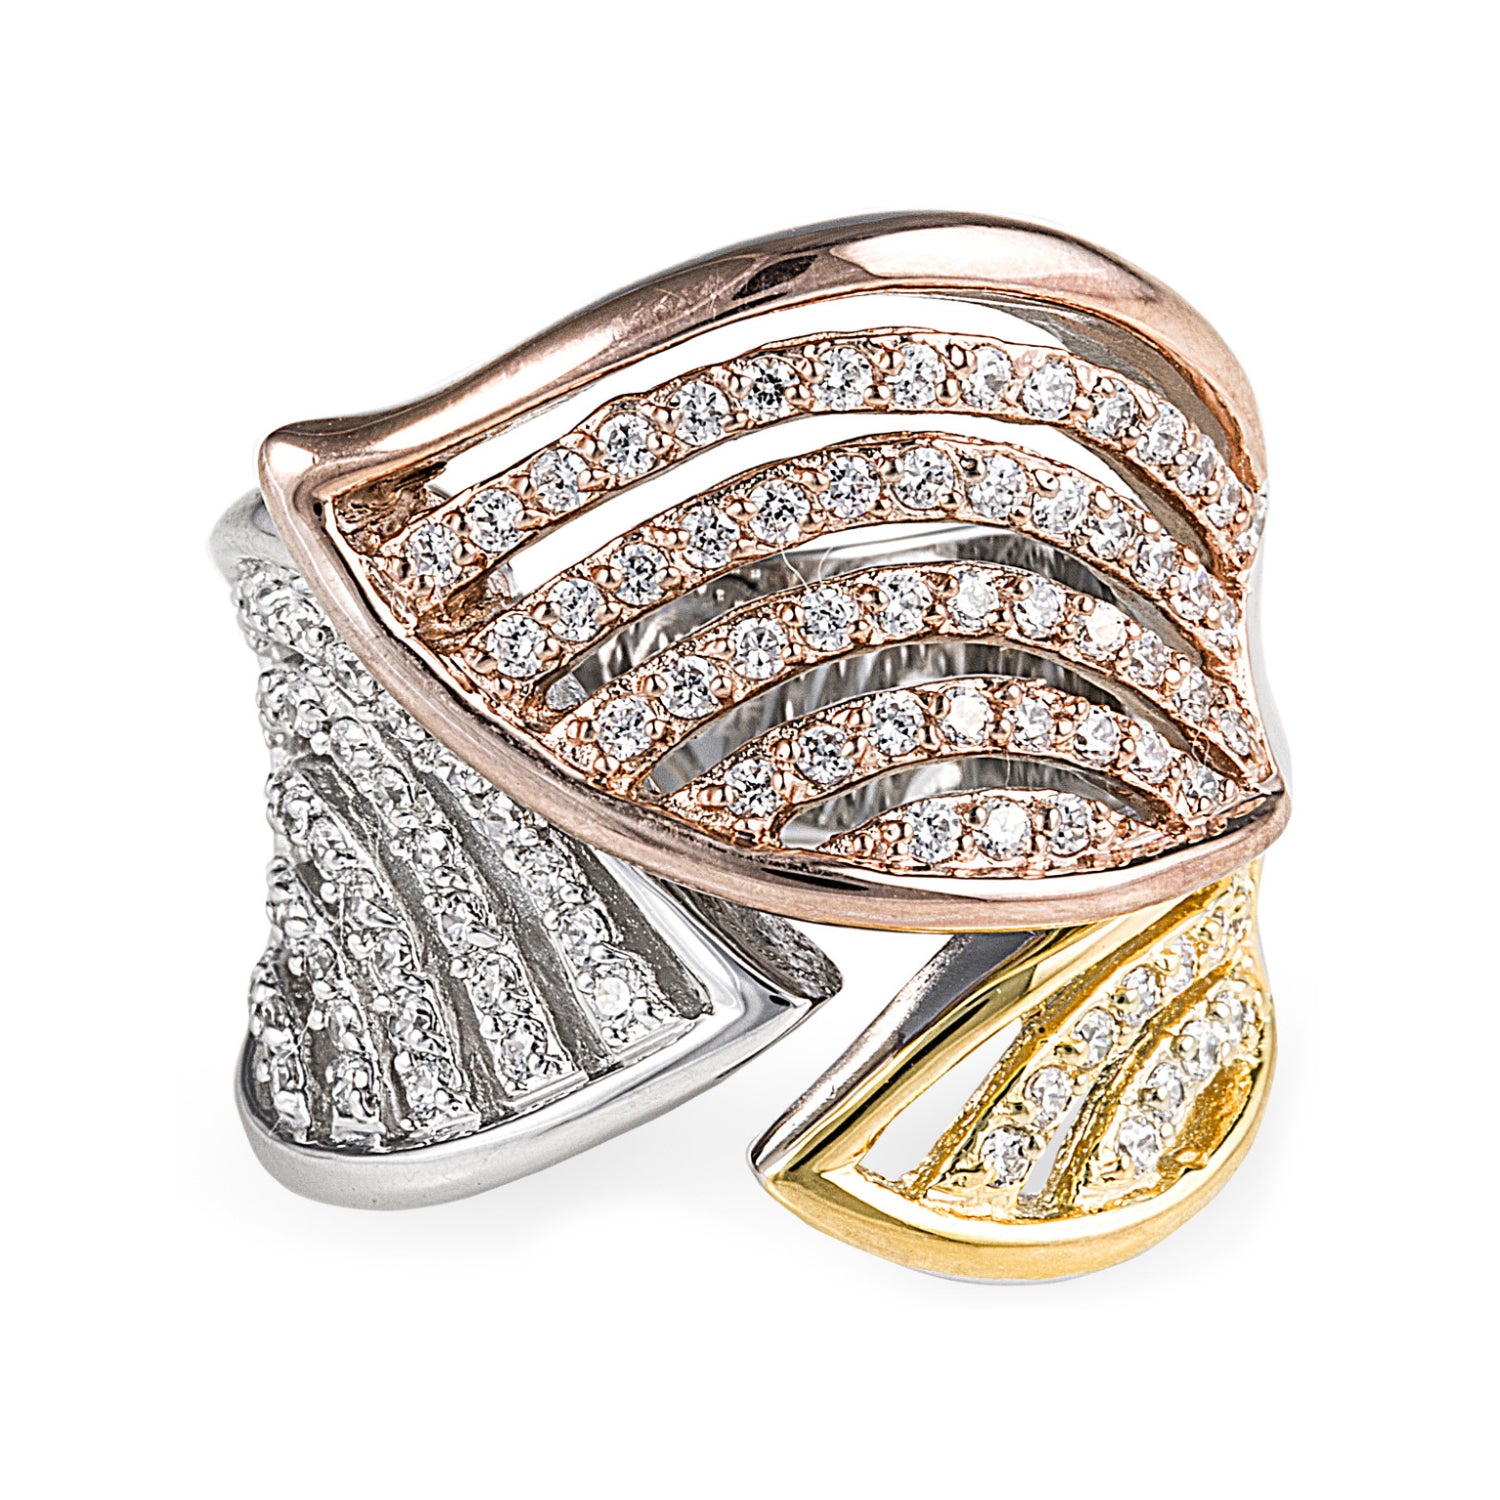 Shop our range of Rose Gold Plated Jewellery by Bellagio & Co